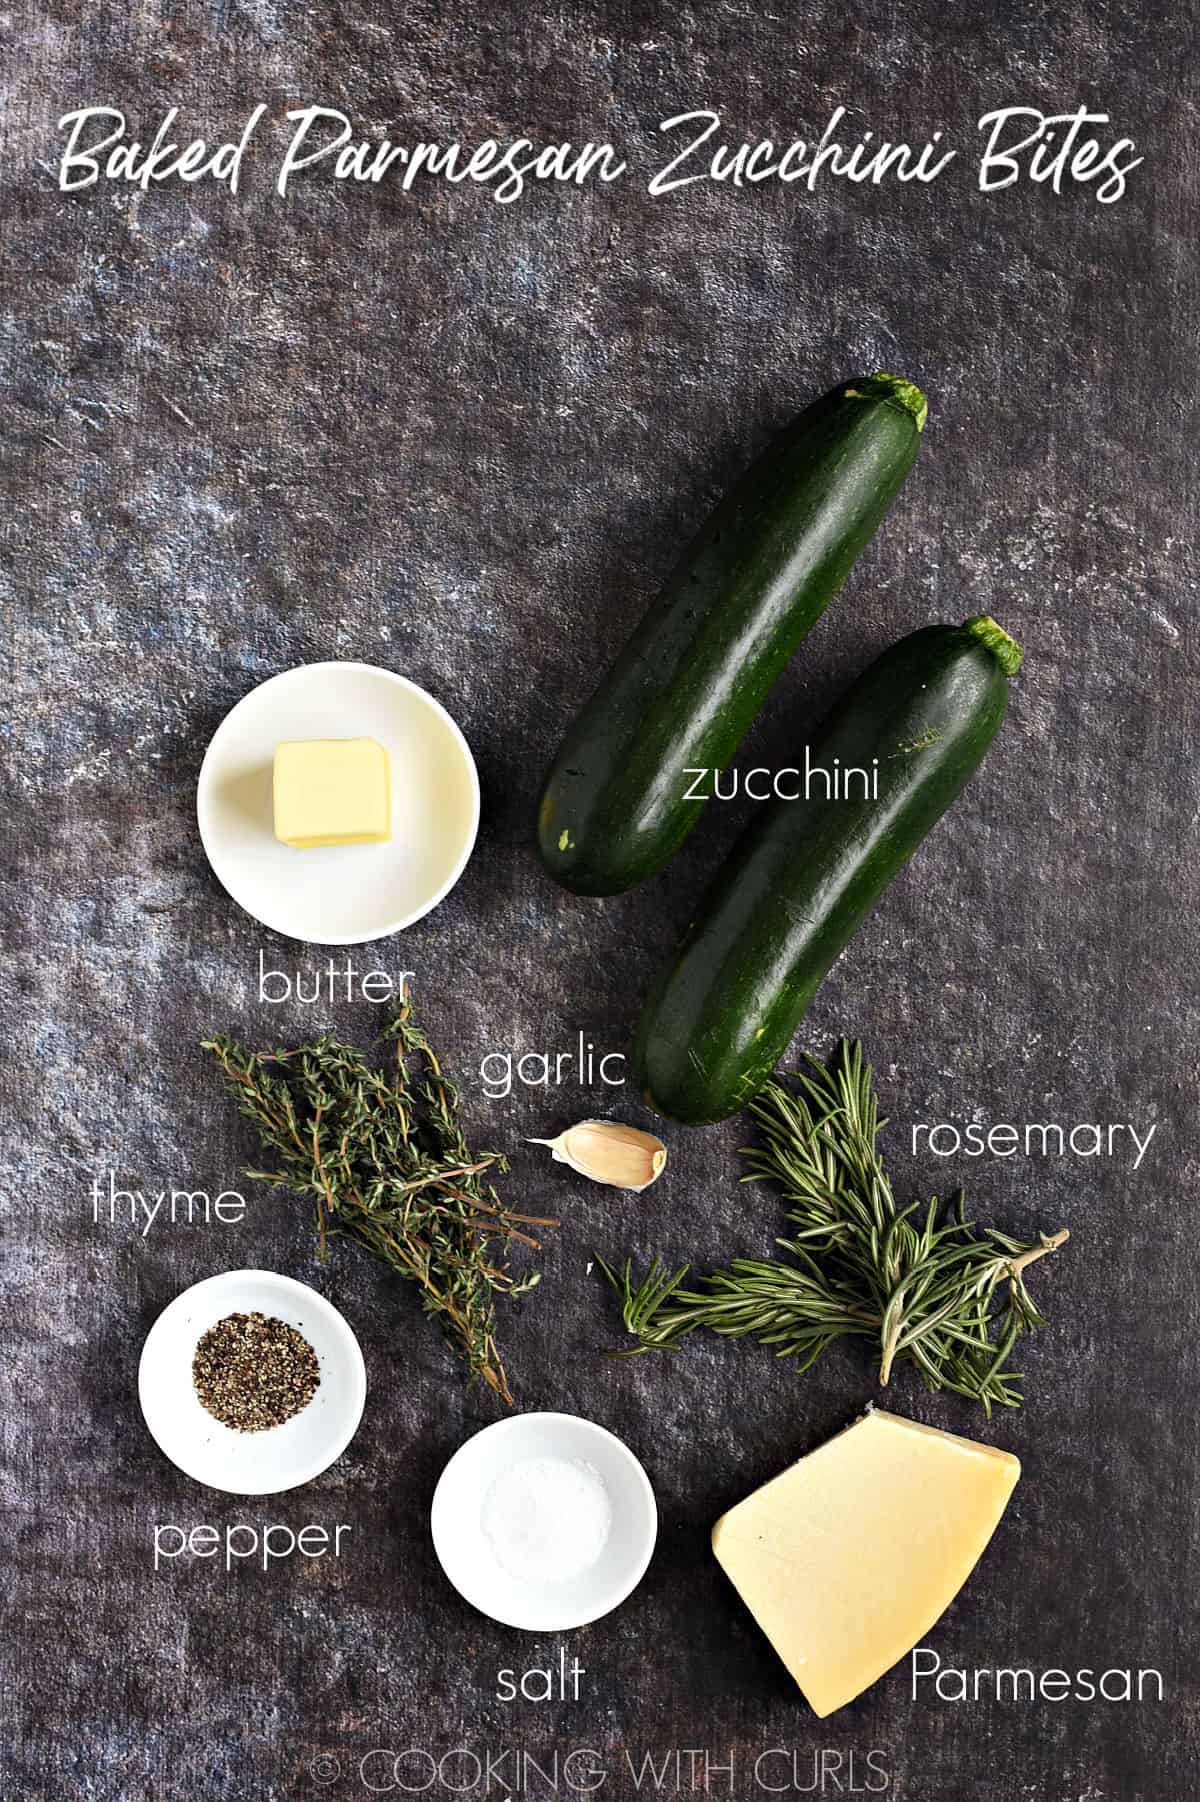 Two zucchini, butter, garlic, rosemary, thyme, Parmesan, salt and pepper on a rustic background.